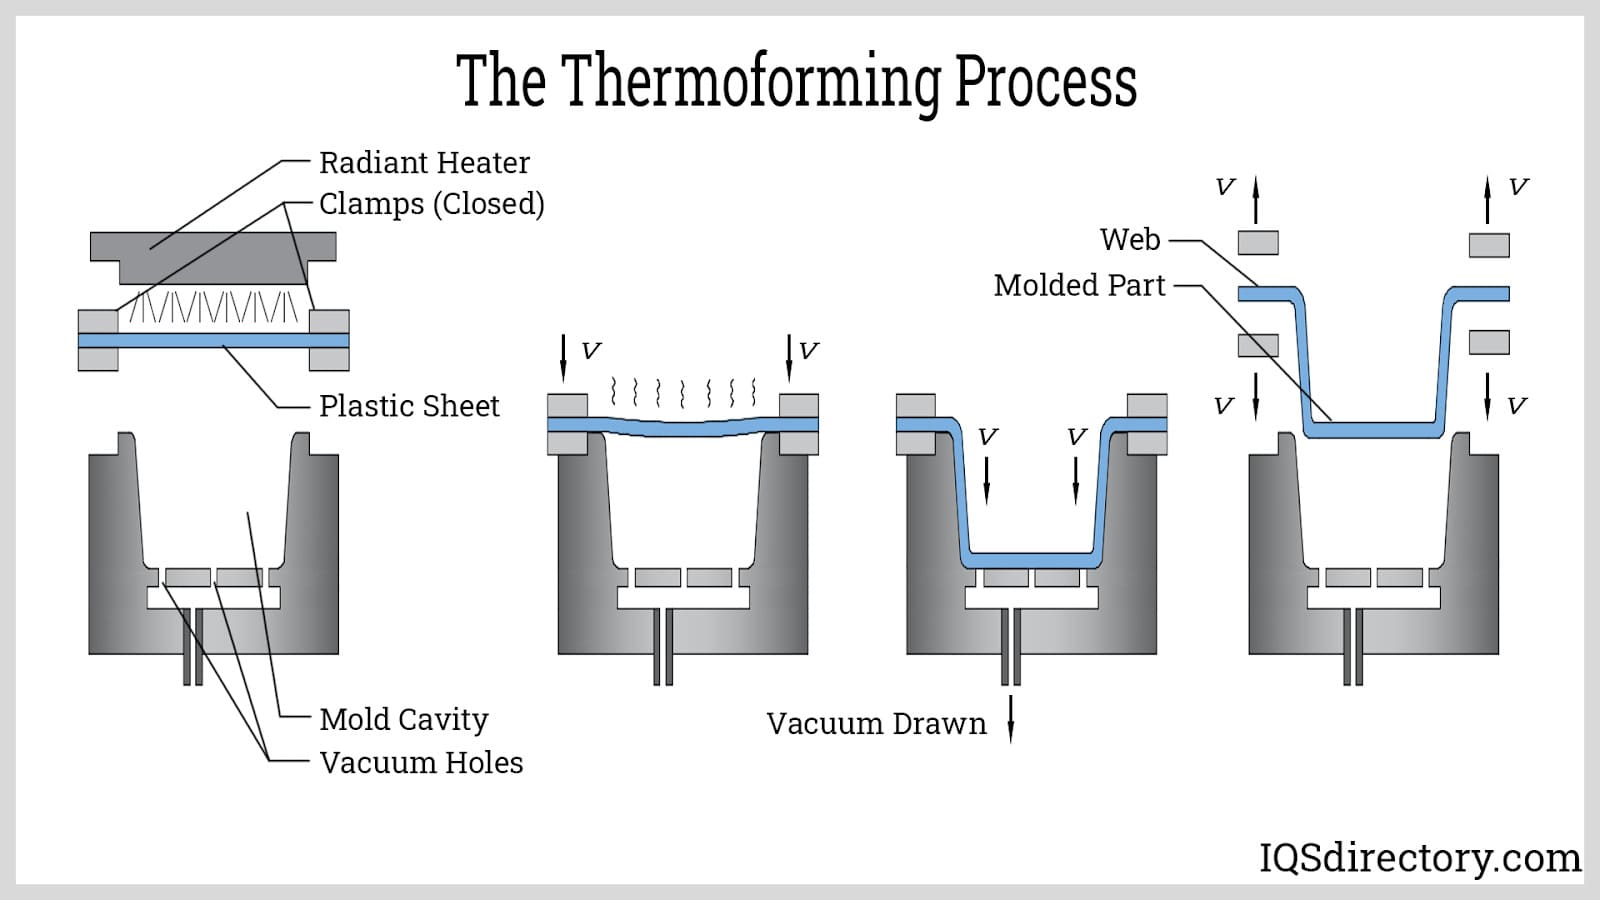 The Thermoforming Process